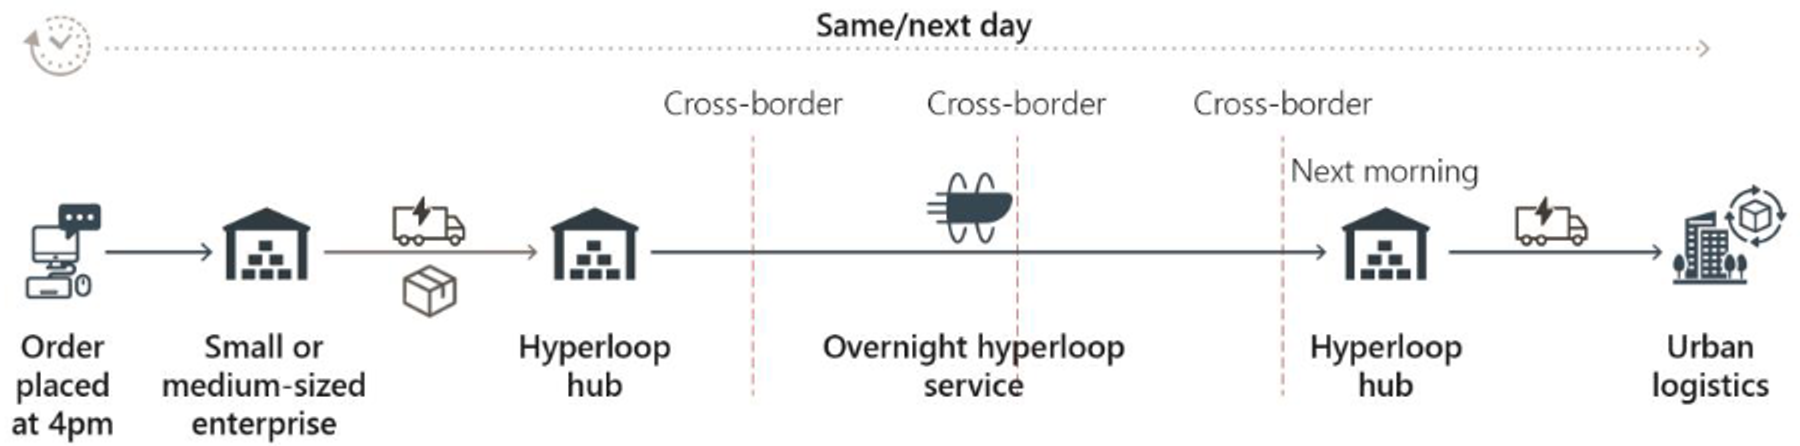 An example of parcels being delivered on the same/next day sustainably and cost-effectively from the Netherlands to Spain by hyperloop combined with zero emission first and last mile.